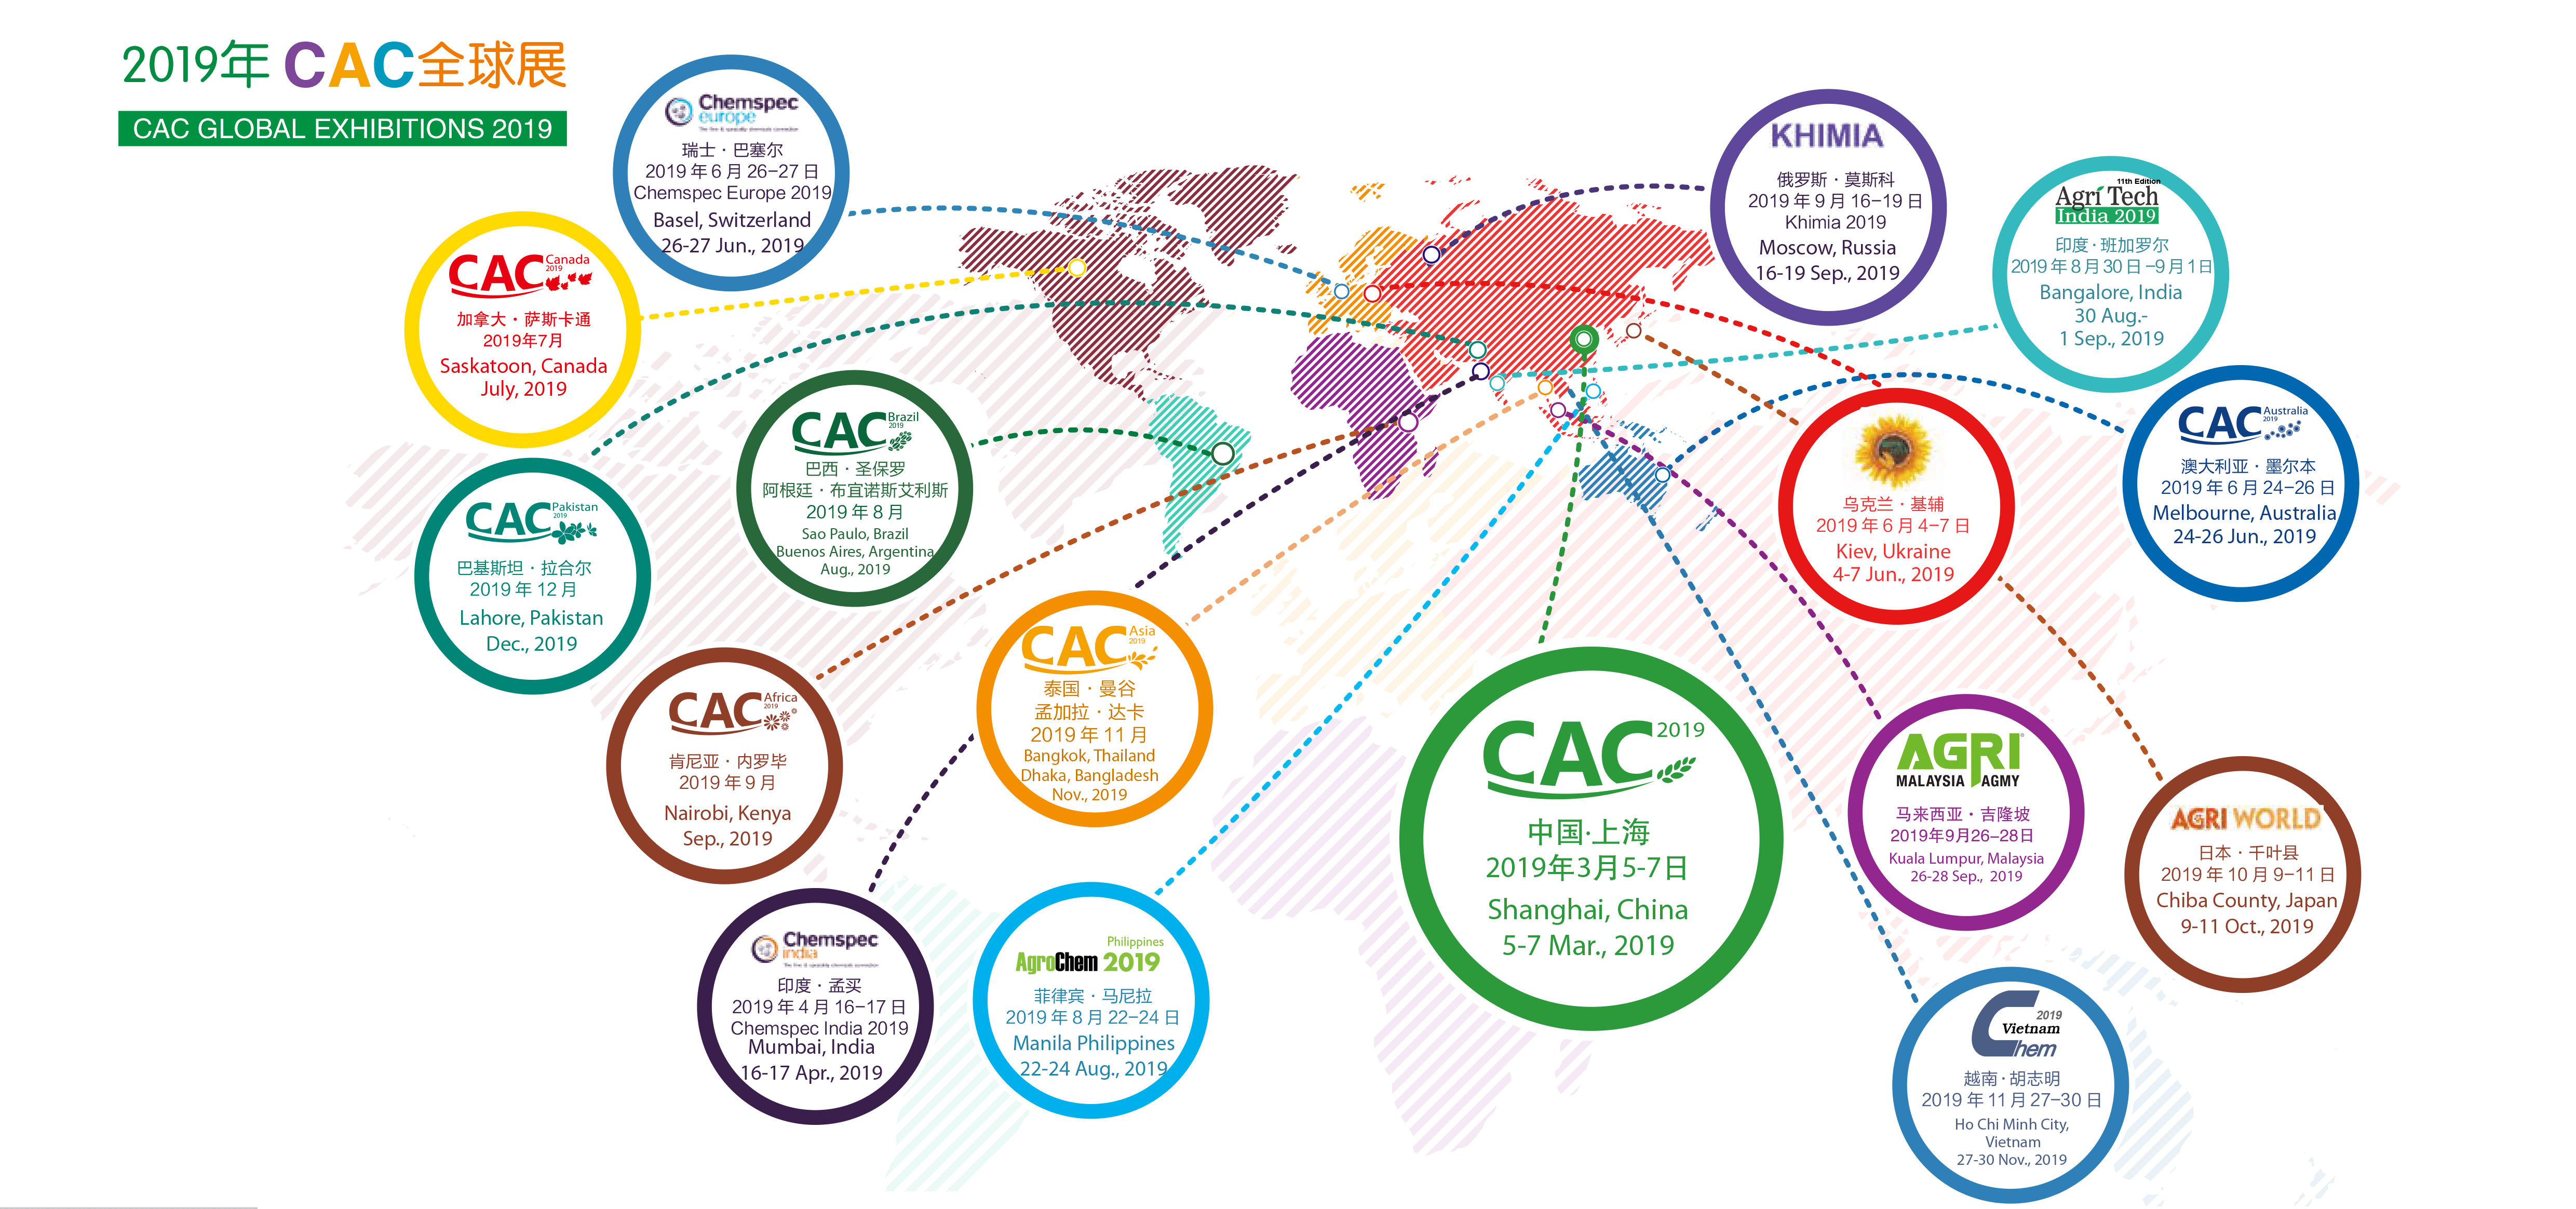 CAC global exhibitions 2019